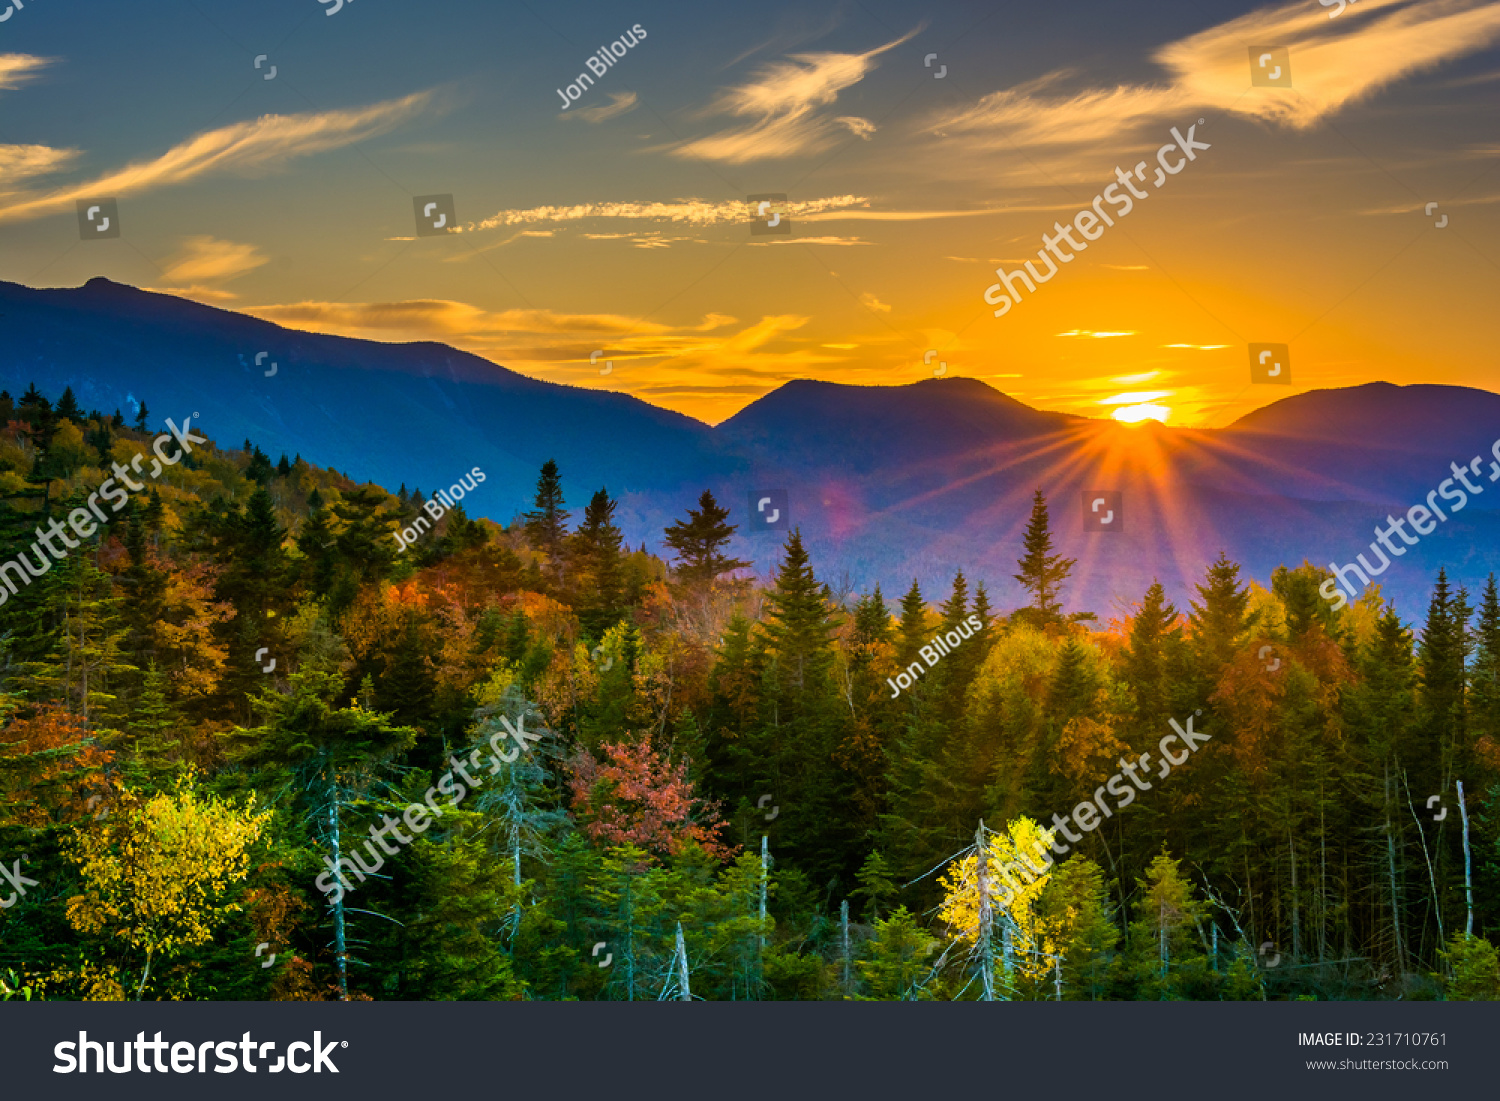 Sunset from  Kancamagus Pass, on the Kancamagus Highway in White Mountain National Forest, New Hampshire. #231710761